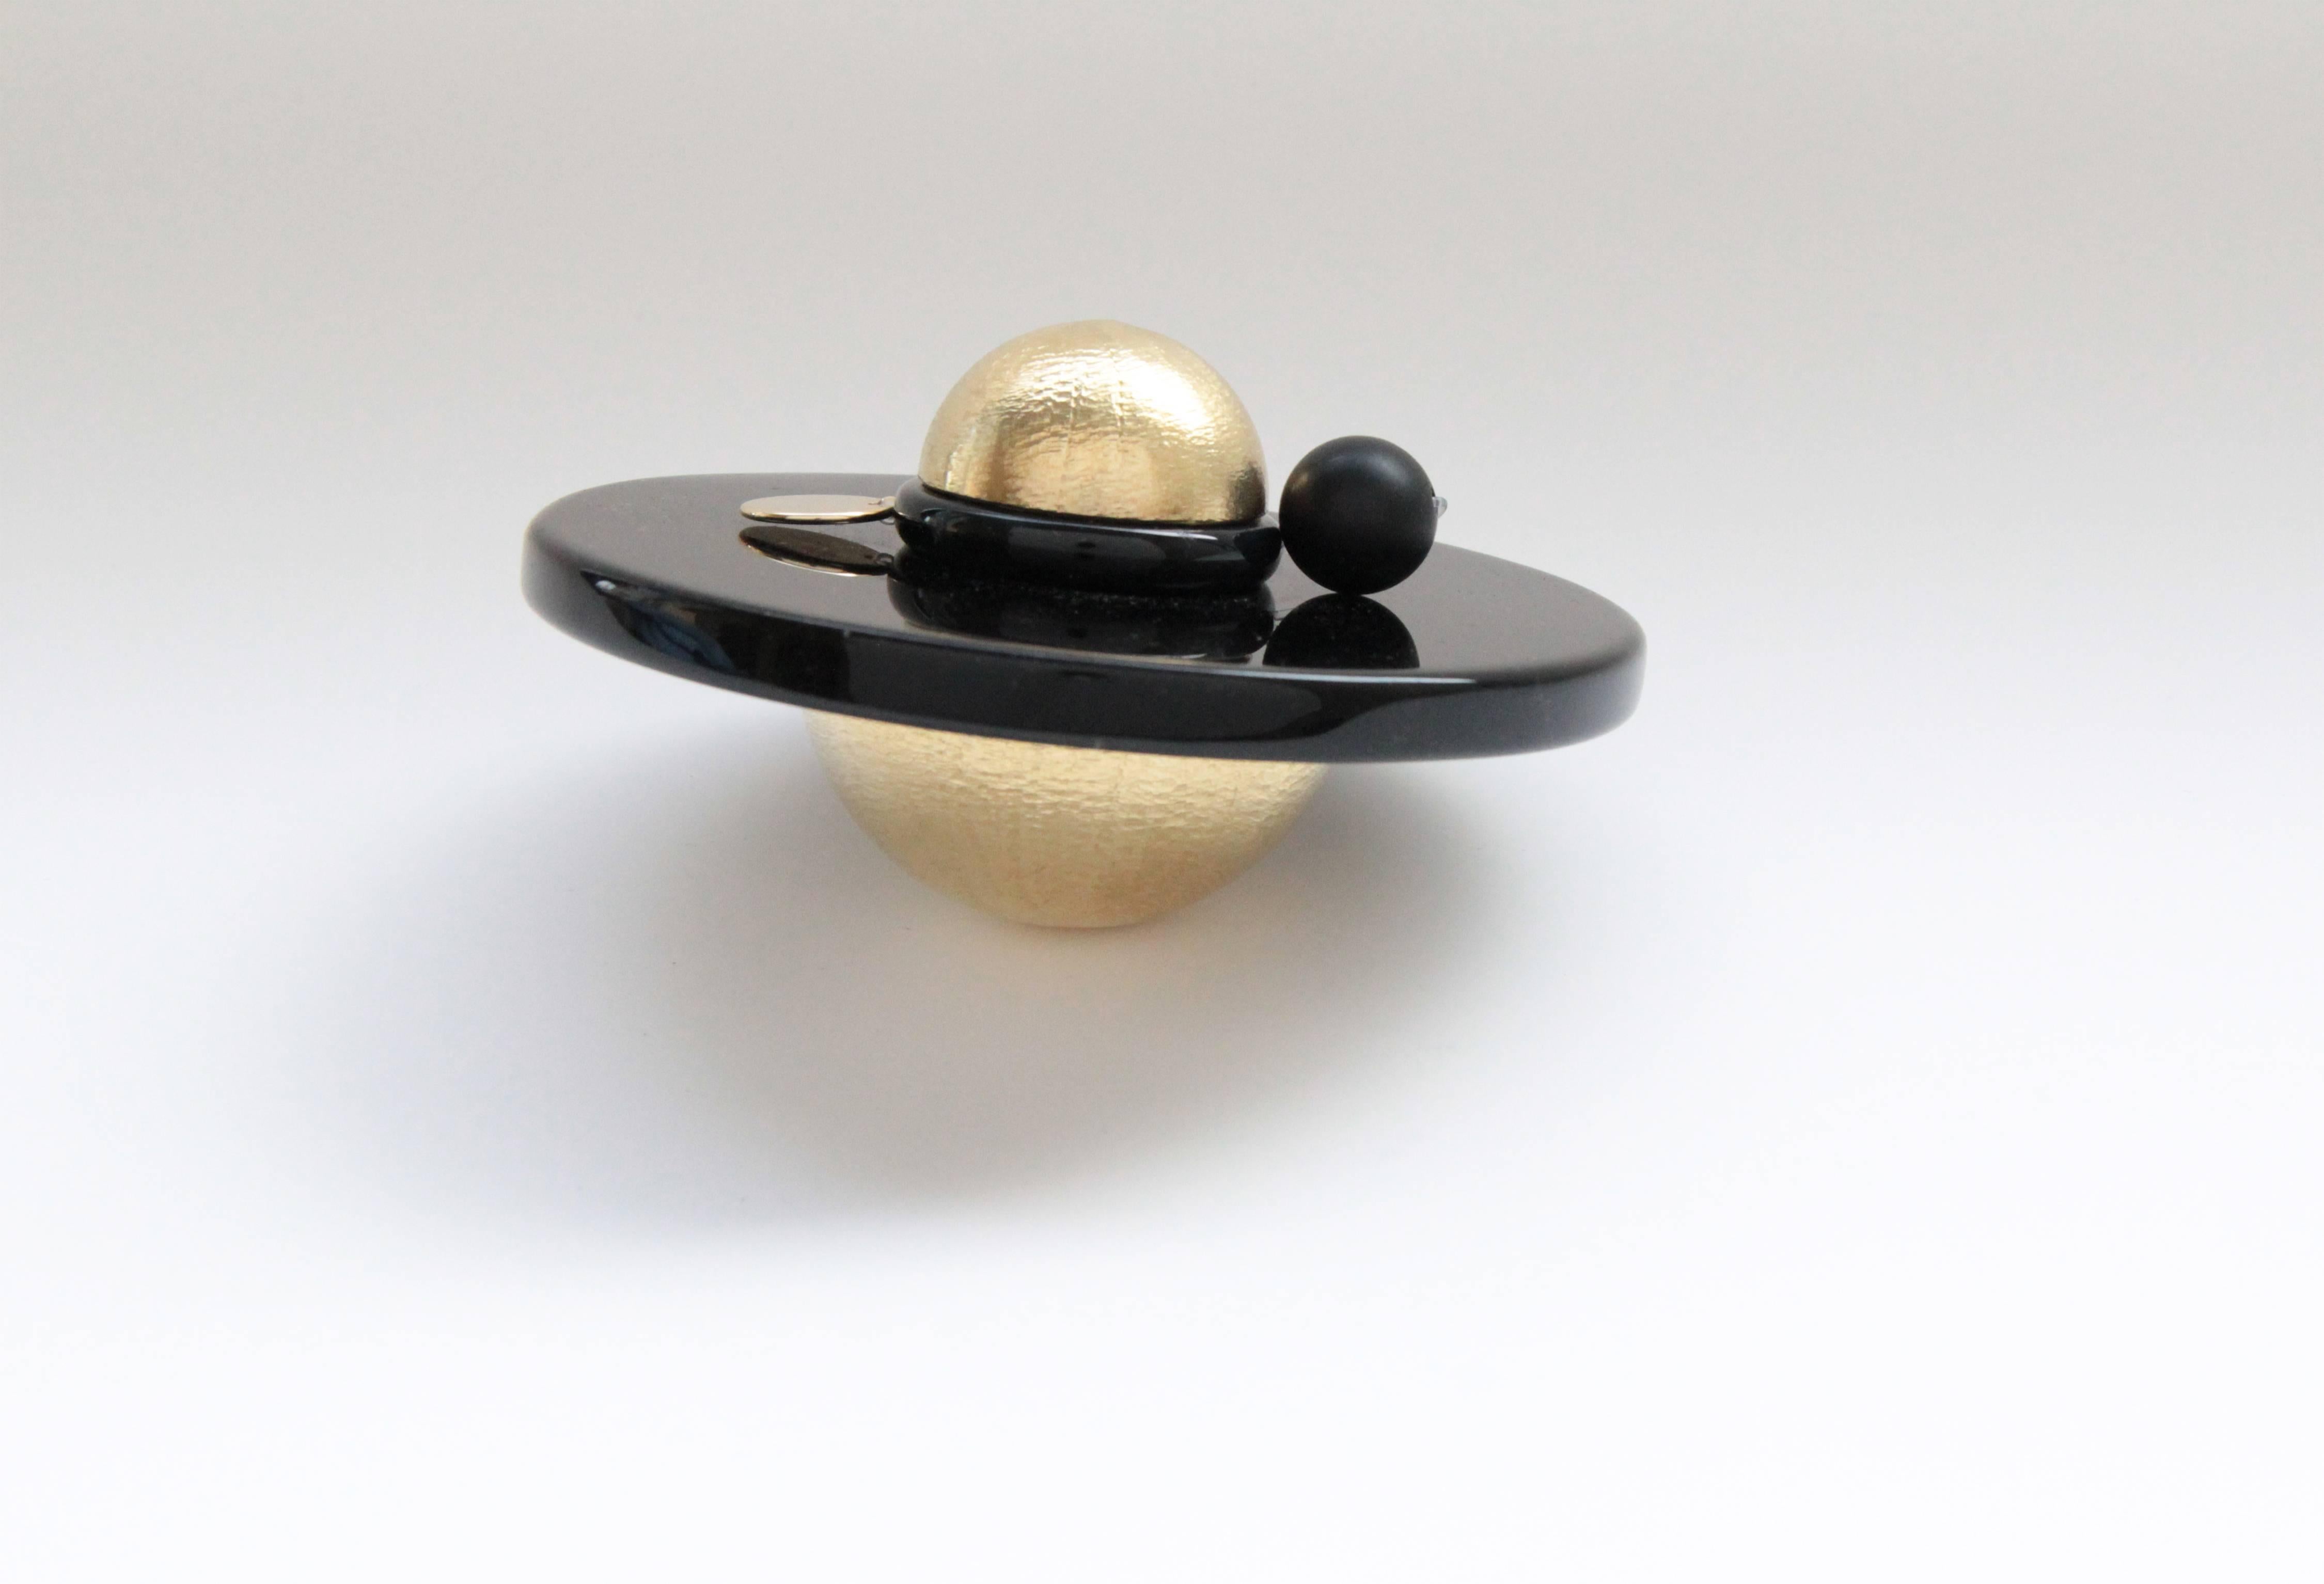 'Saturno' is a handcrafted contemporary design object inspired by the cosmos and the mysterious planet, Saturn. Made from hand etched solid cast brass, black obsidian glass, and set with glass beads, black stone and metal disc. 'Saturno' is a